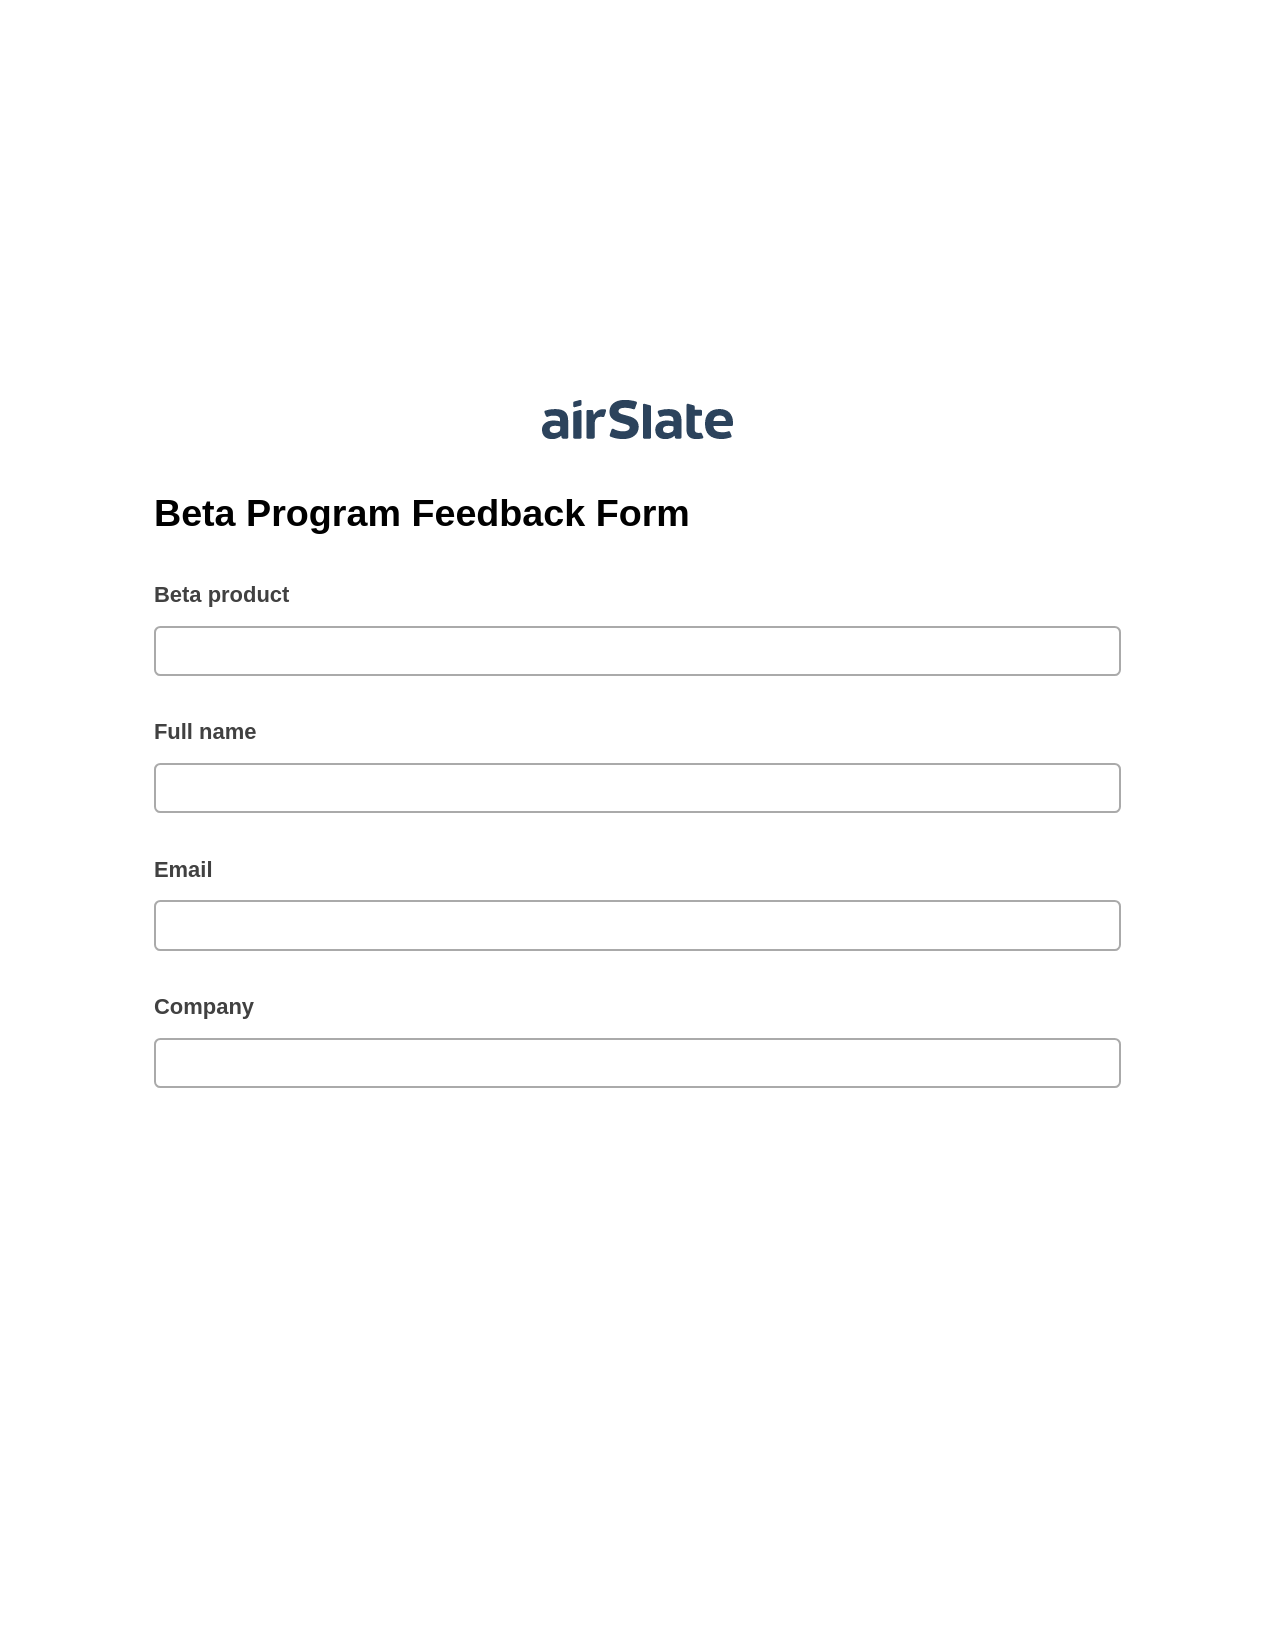 Beta Program Feedback Form Pre-fill from Salesforce Record Bot, Roles Reminder Bot, Export to NetSuite Record Bot